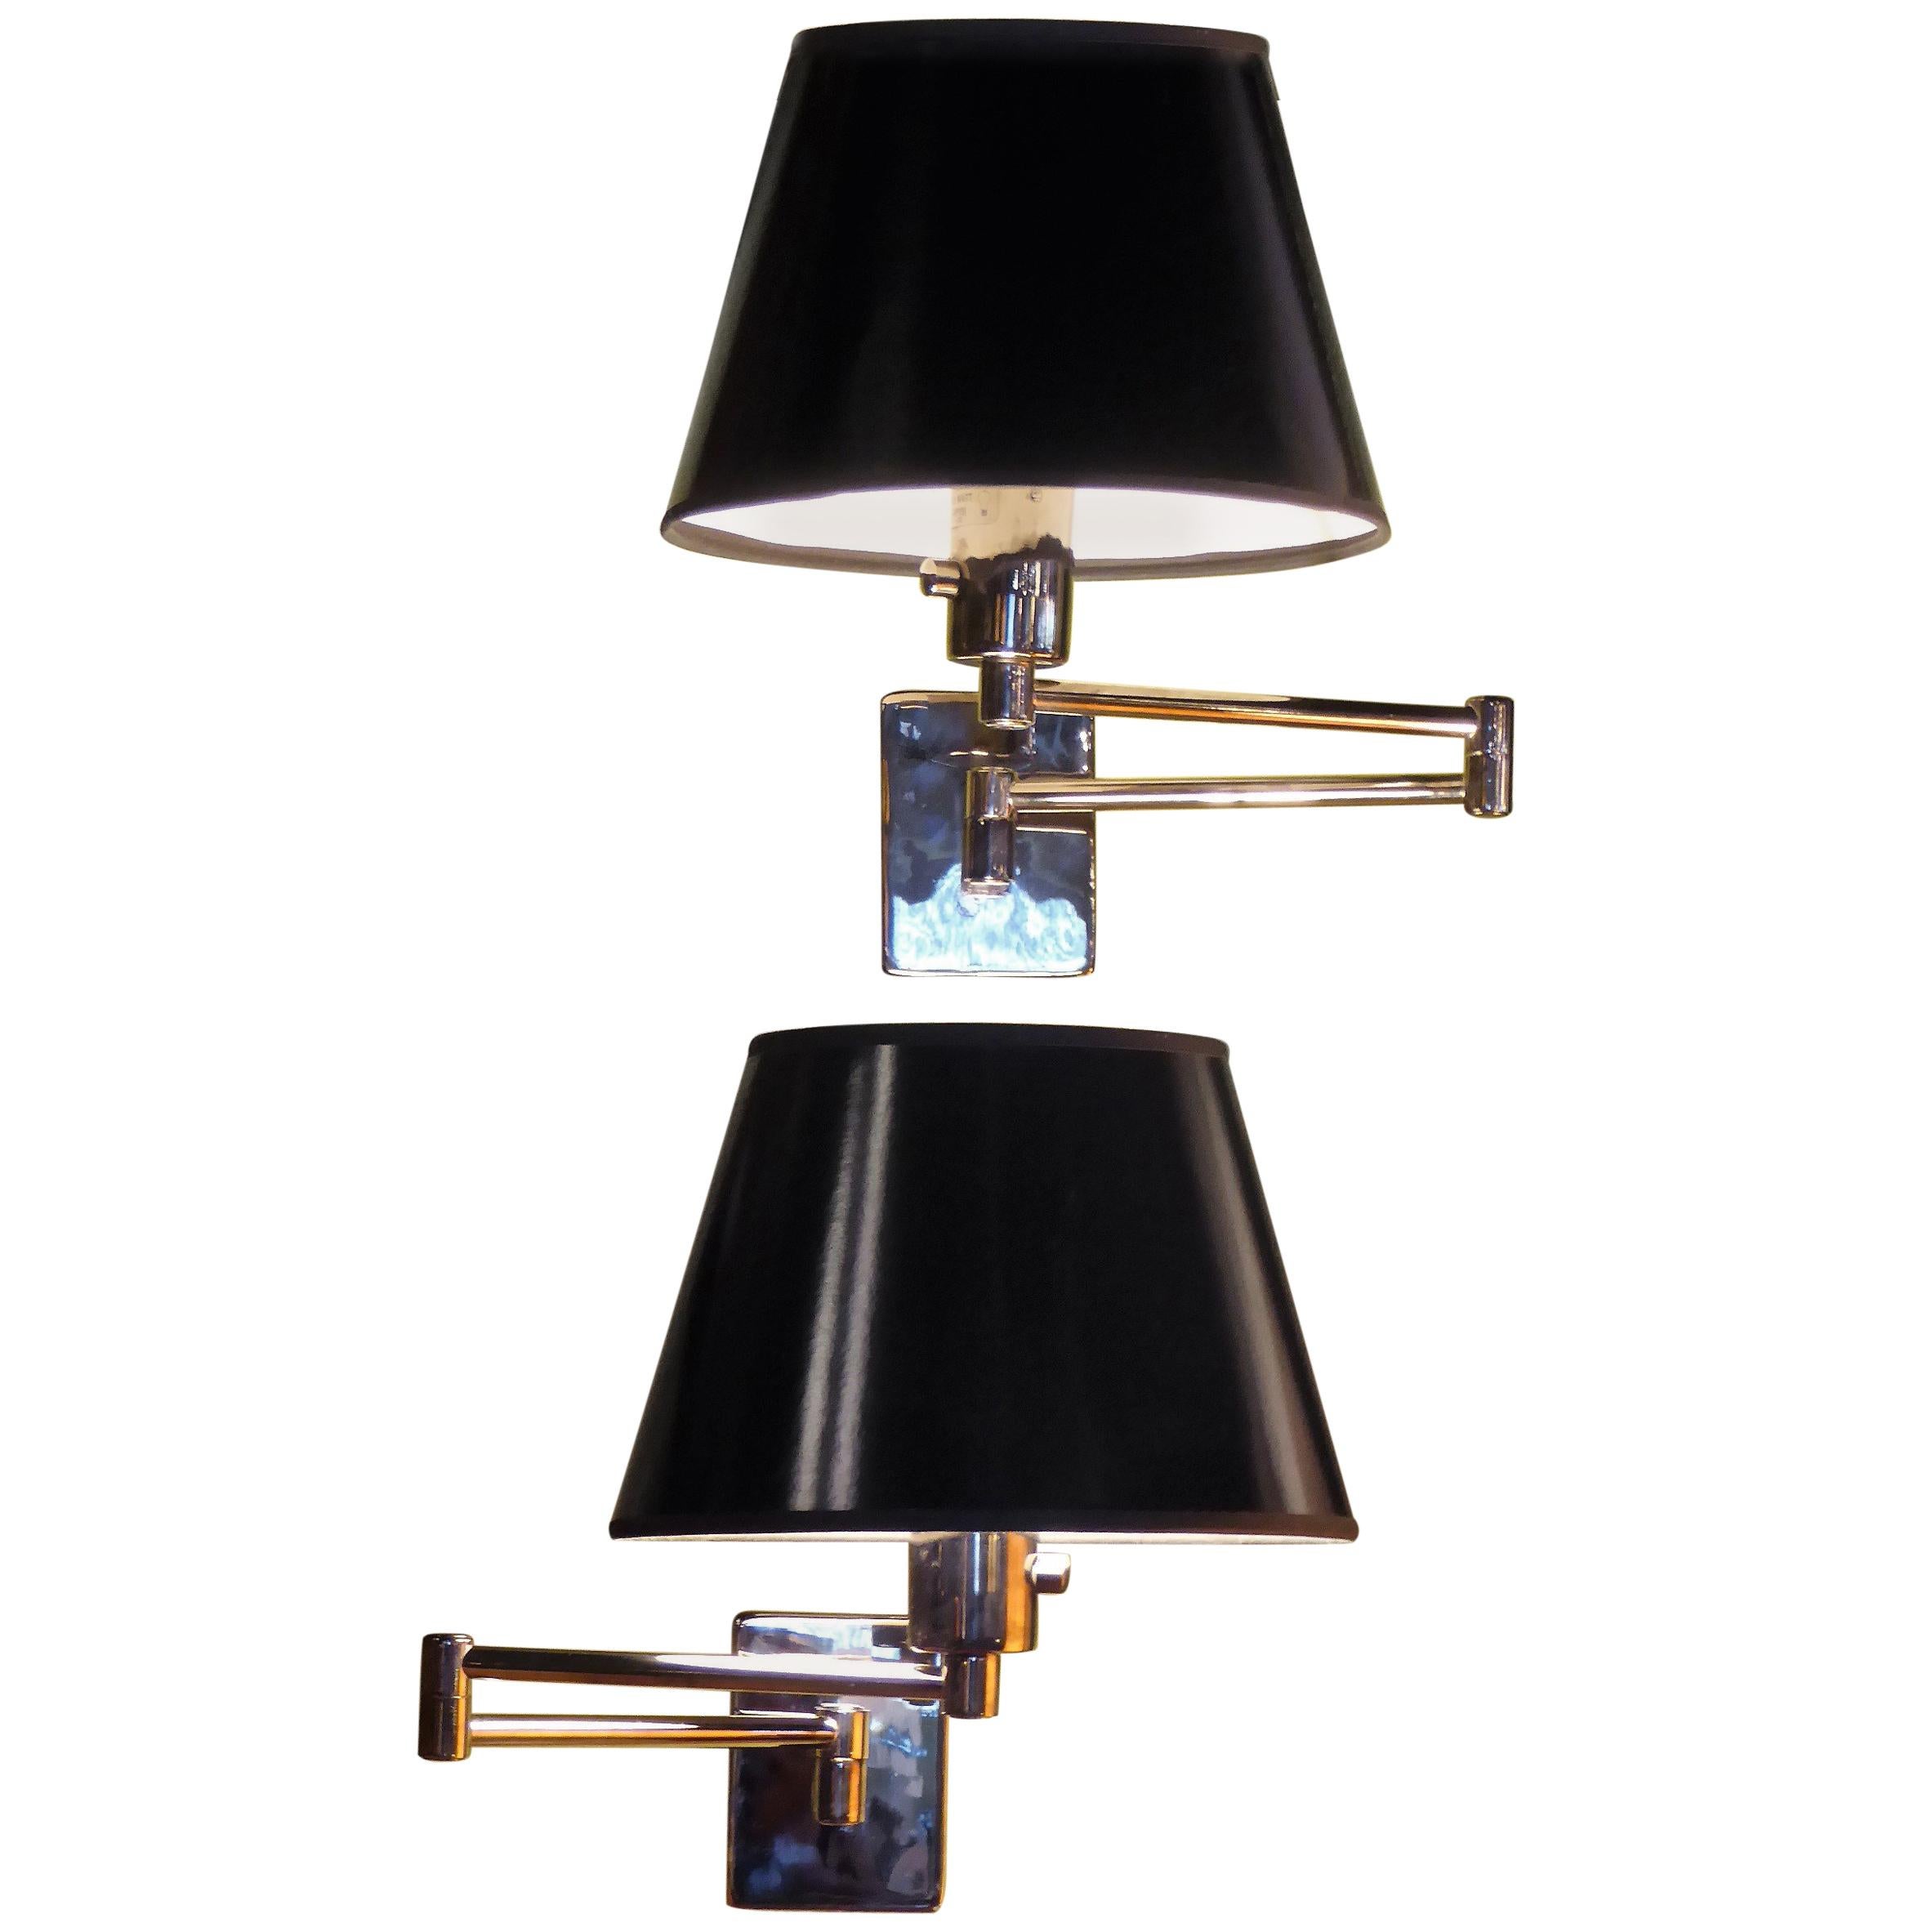 Pair of Hinson Swing Arm Wall Lights in Bright Gunmetal for Hansen Donghia